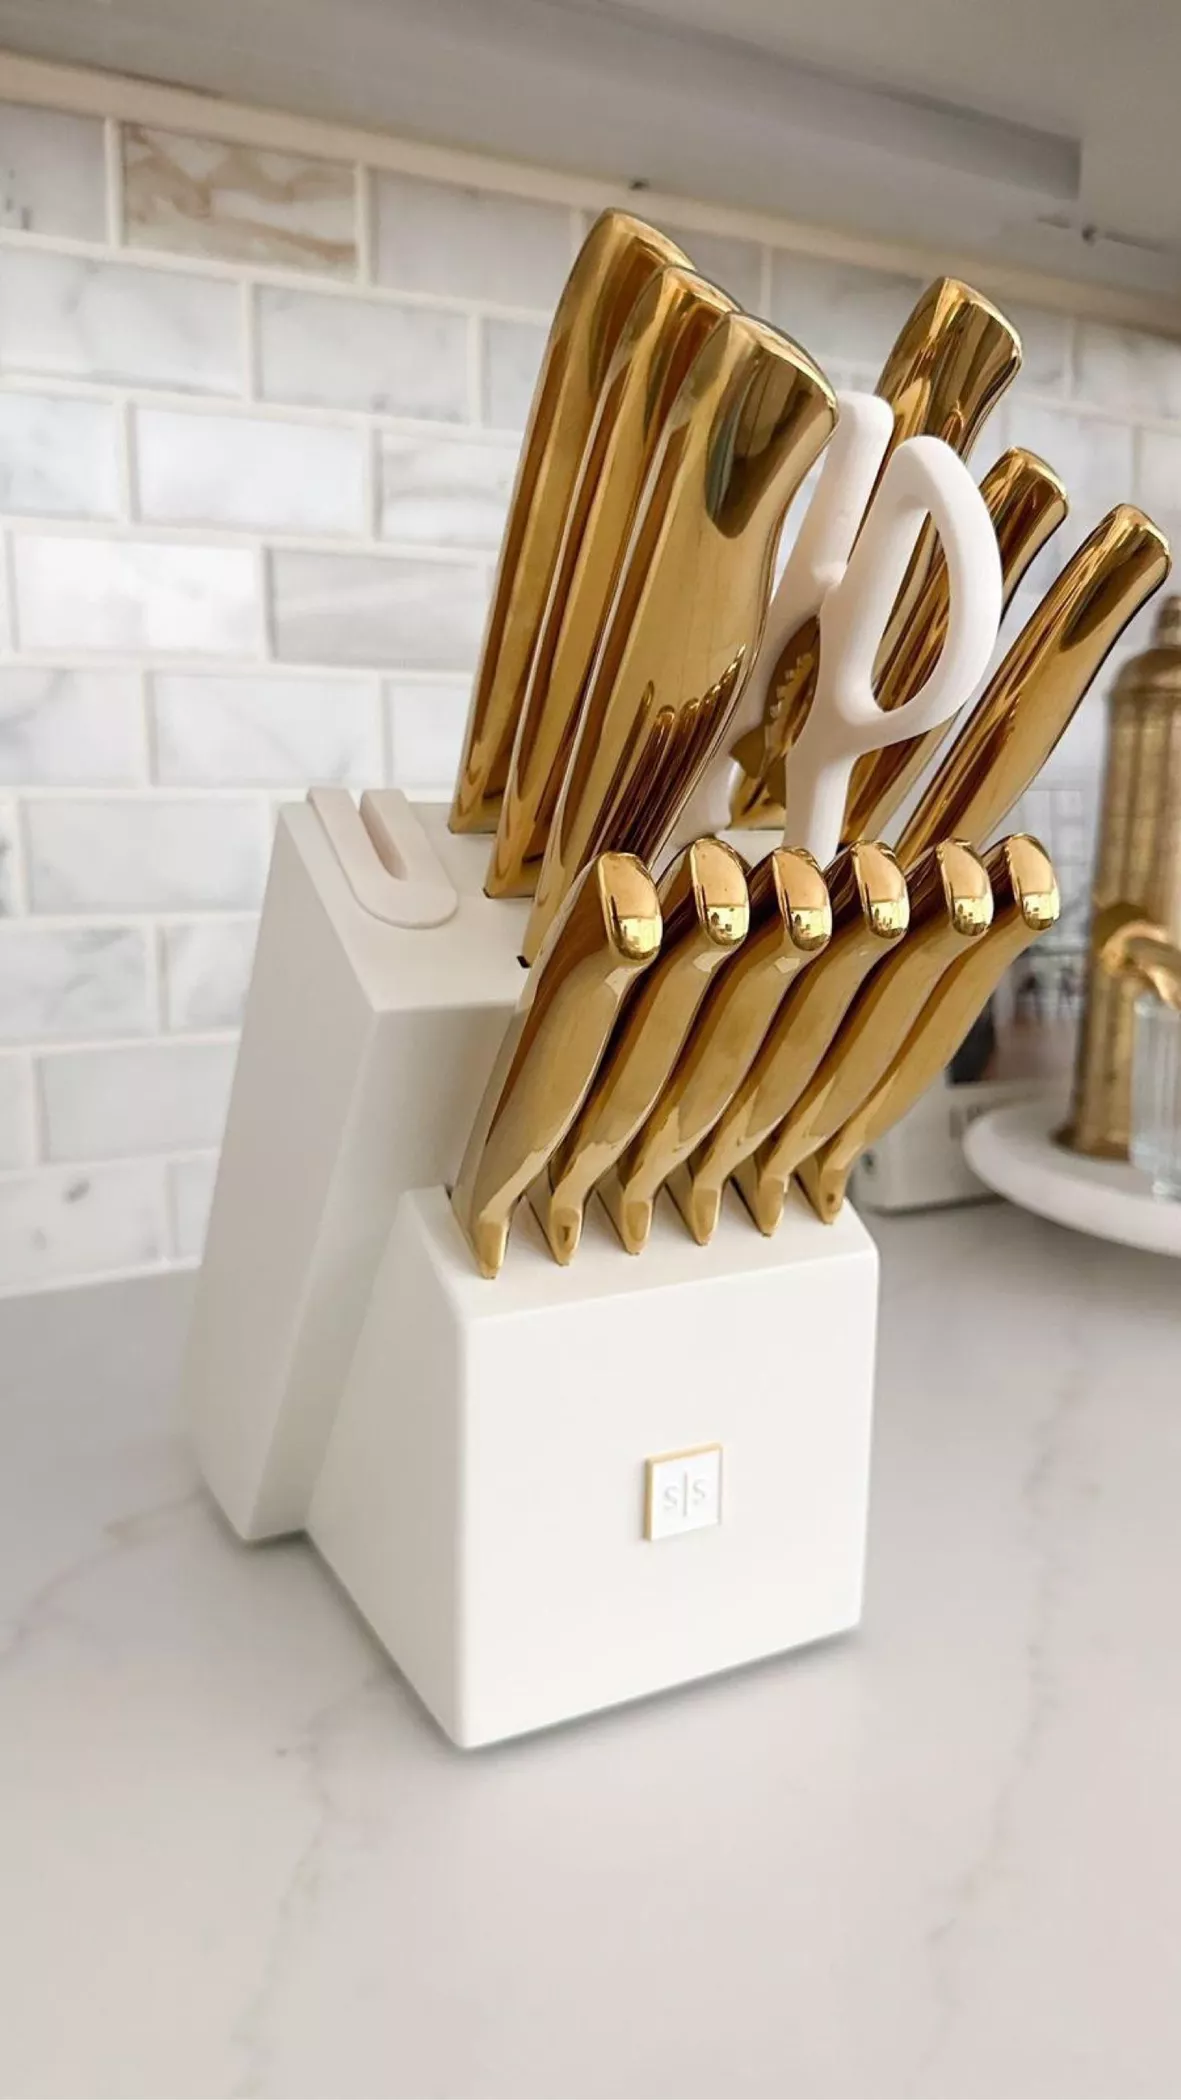 White and Gold Knife Set with Block Self Sharpening - 14 PC Titanium Coated  Gold and White Kitchen Knife Set and White Knife Block with Sharpener